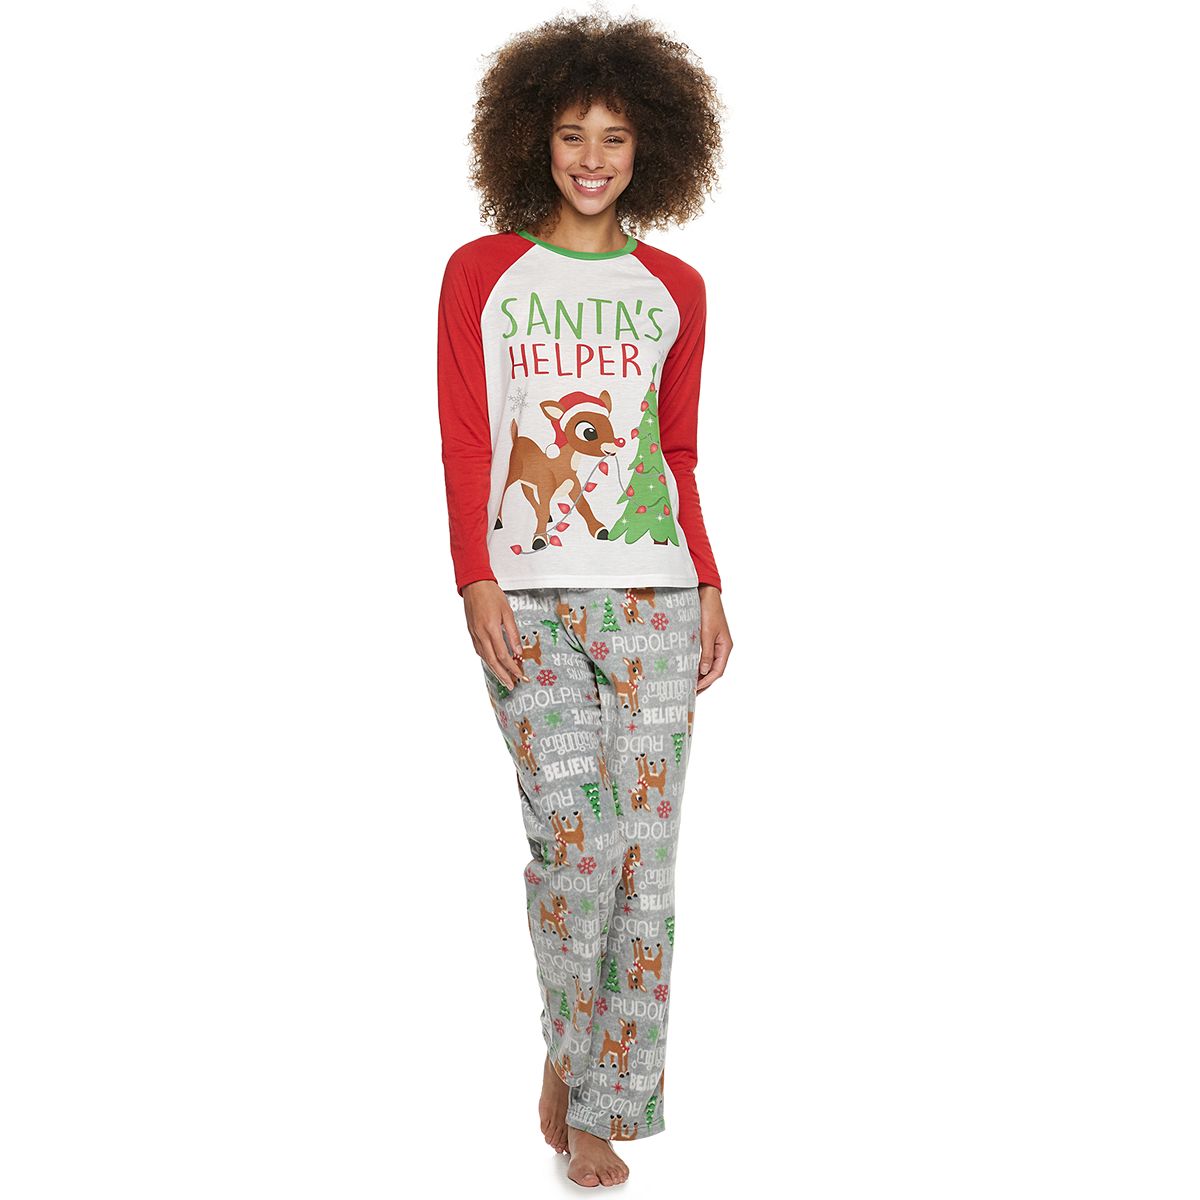 Women's Christmas Pajamas: Shop for Festive Apparel for the Whole ...